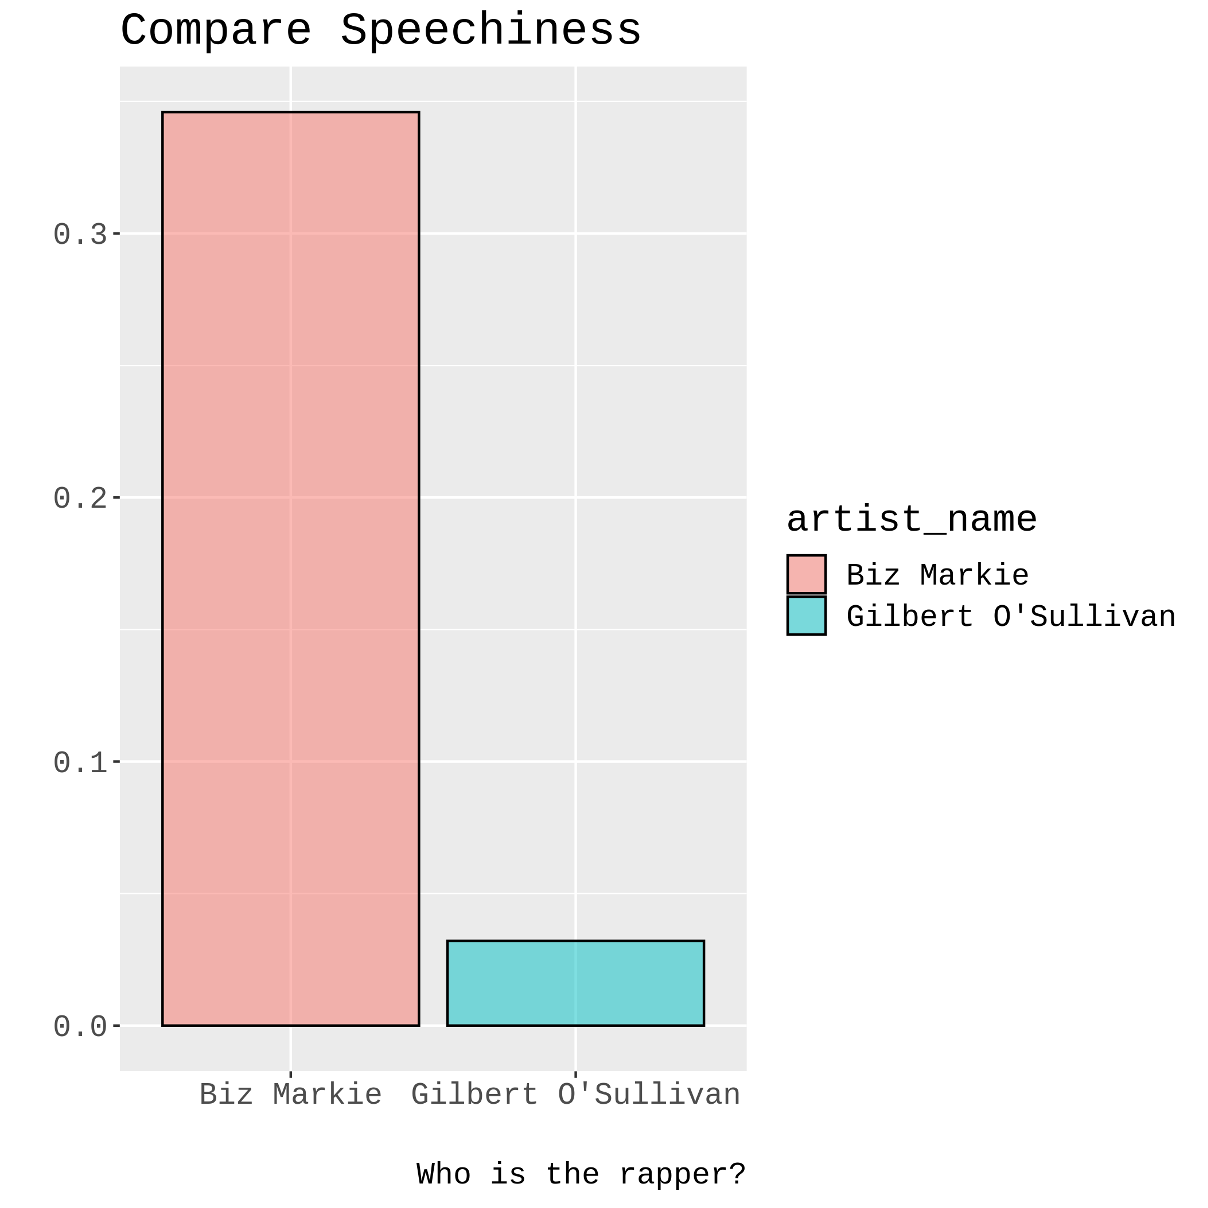 Visualisation of the “speechiness” audio feature from Spotify: Biz Markie is obviously much “speechier” than O’Sullivan, and no doubt the former is a rapper! This simple barplot comparison can is generated with tidyverse’s ggplot2.